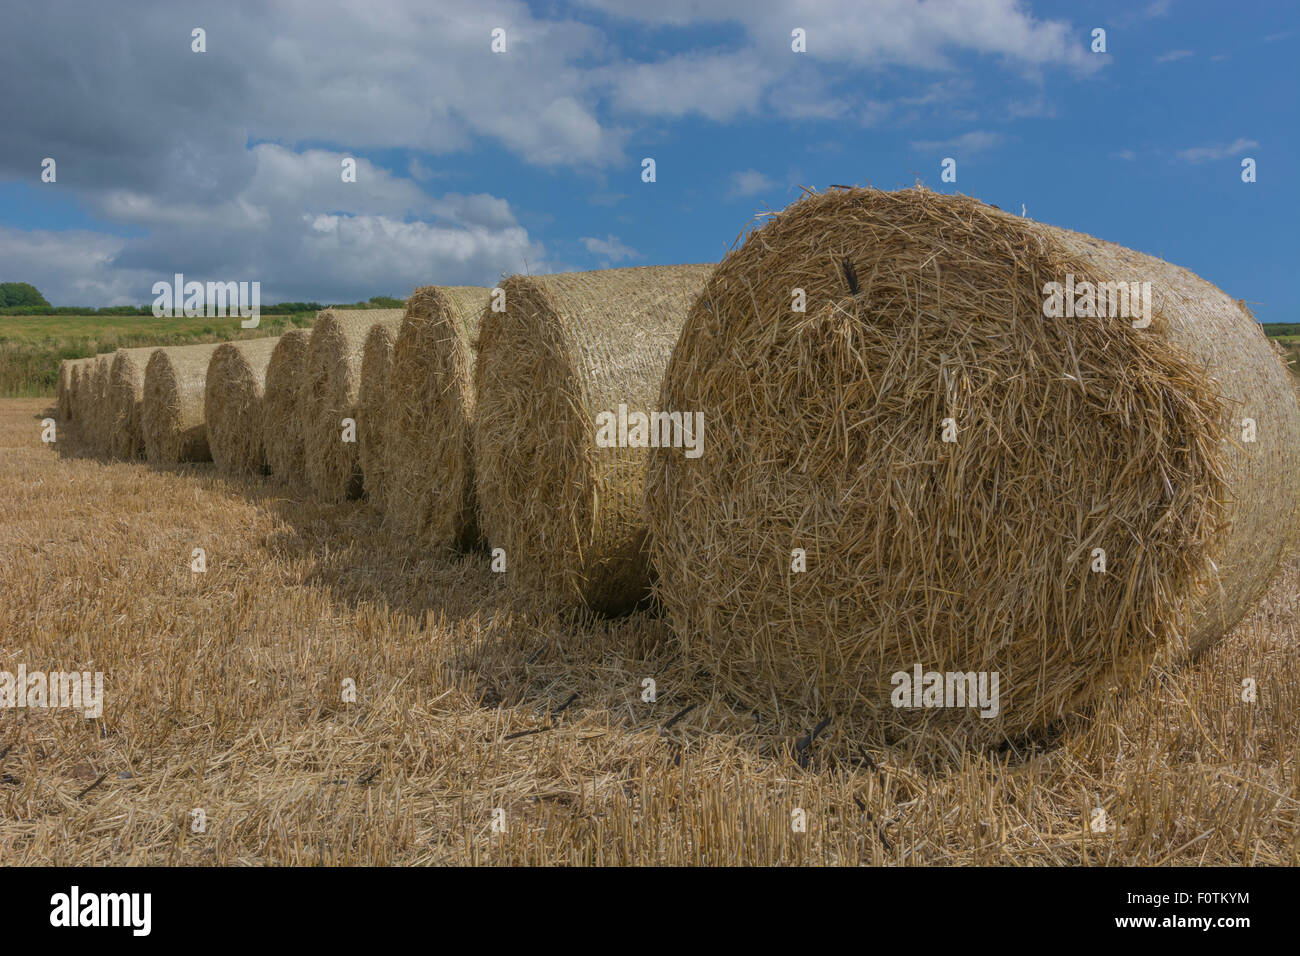 Hay / straw bales and stubble field after harvested cereal crop. Metaphor for food security / growing food, farm subsidies. Stock Photo